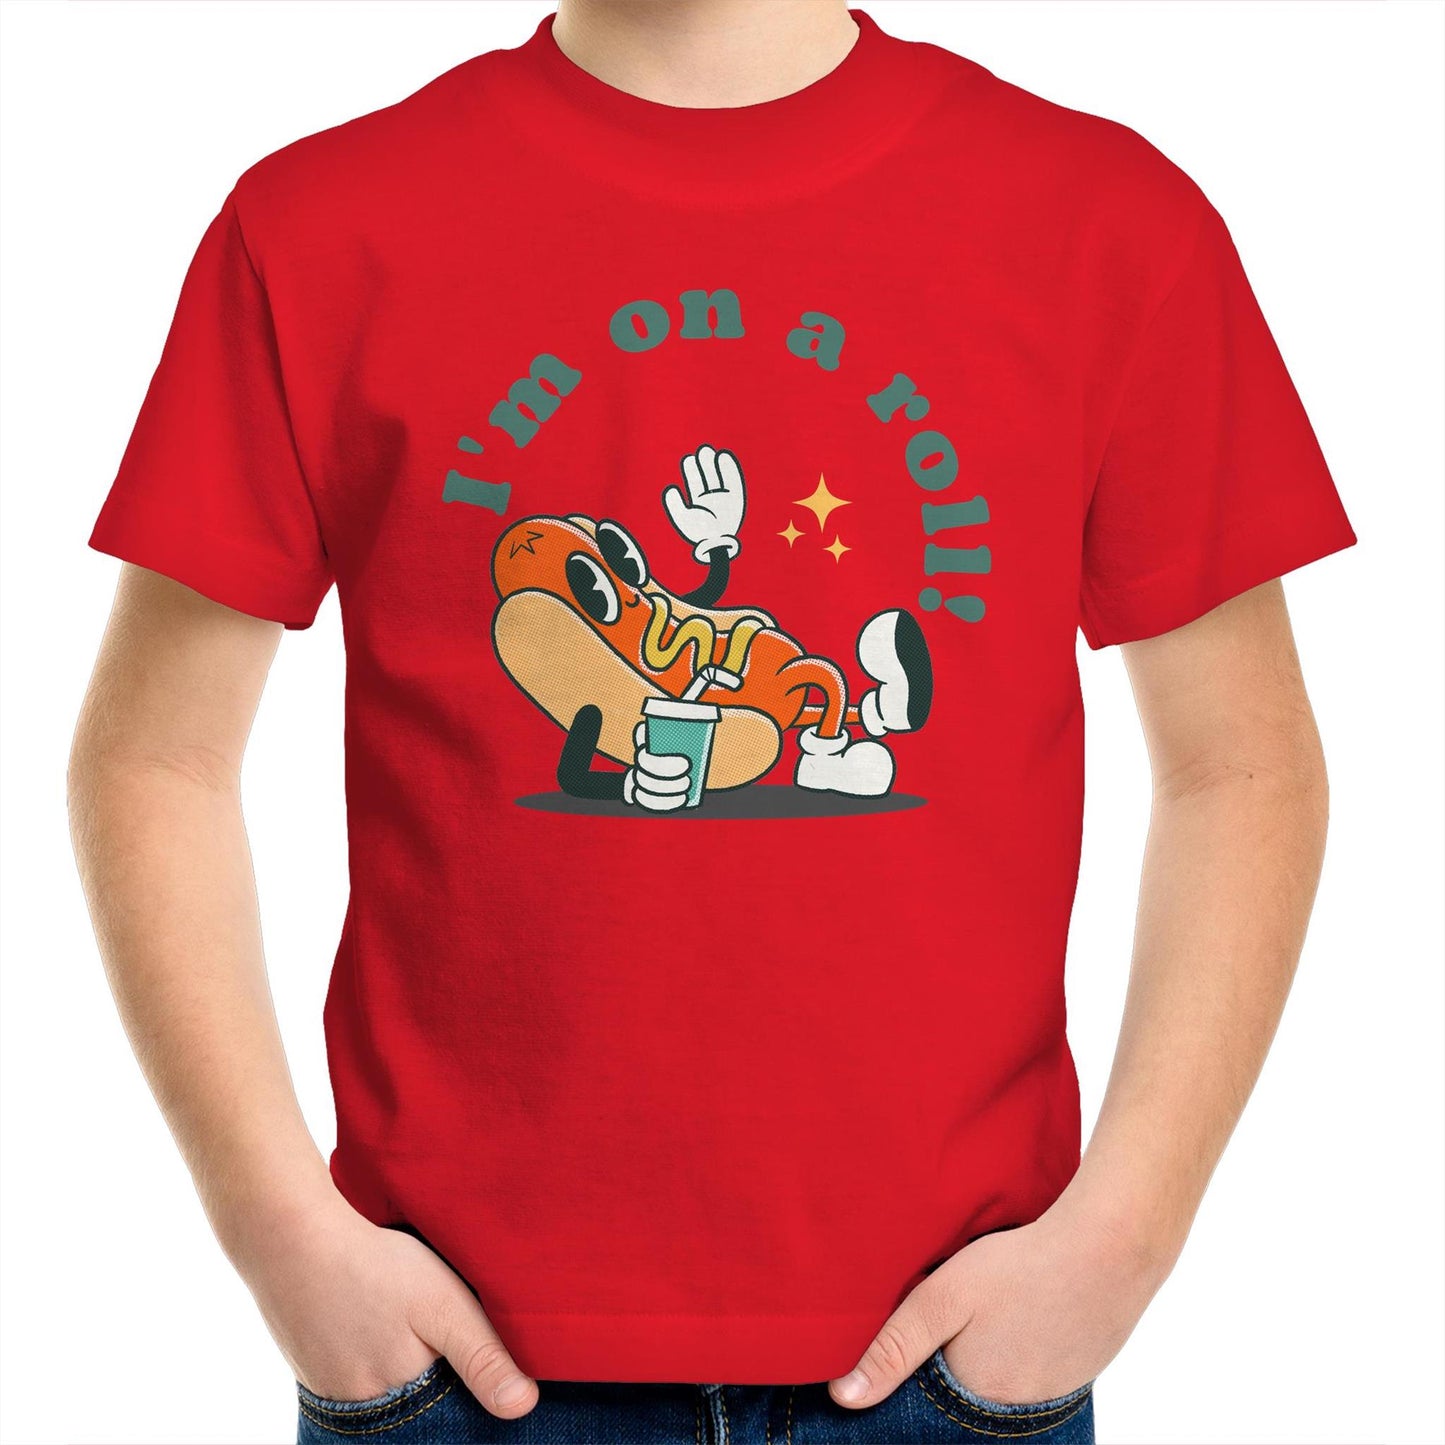 Hot Dog, I'm On A Roll - Kids Youth T-Shirt Red Kids Youth T-shirt Food